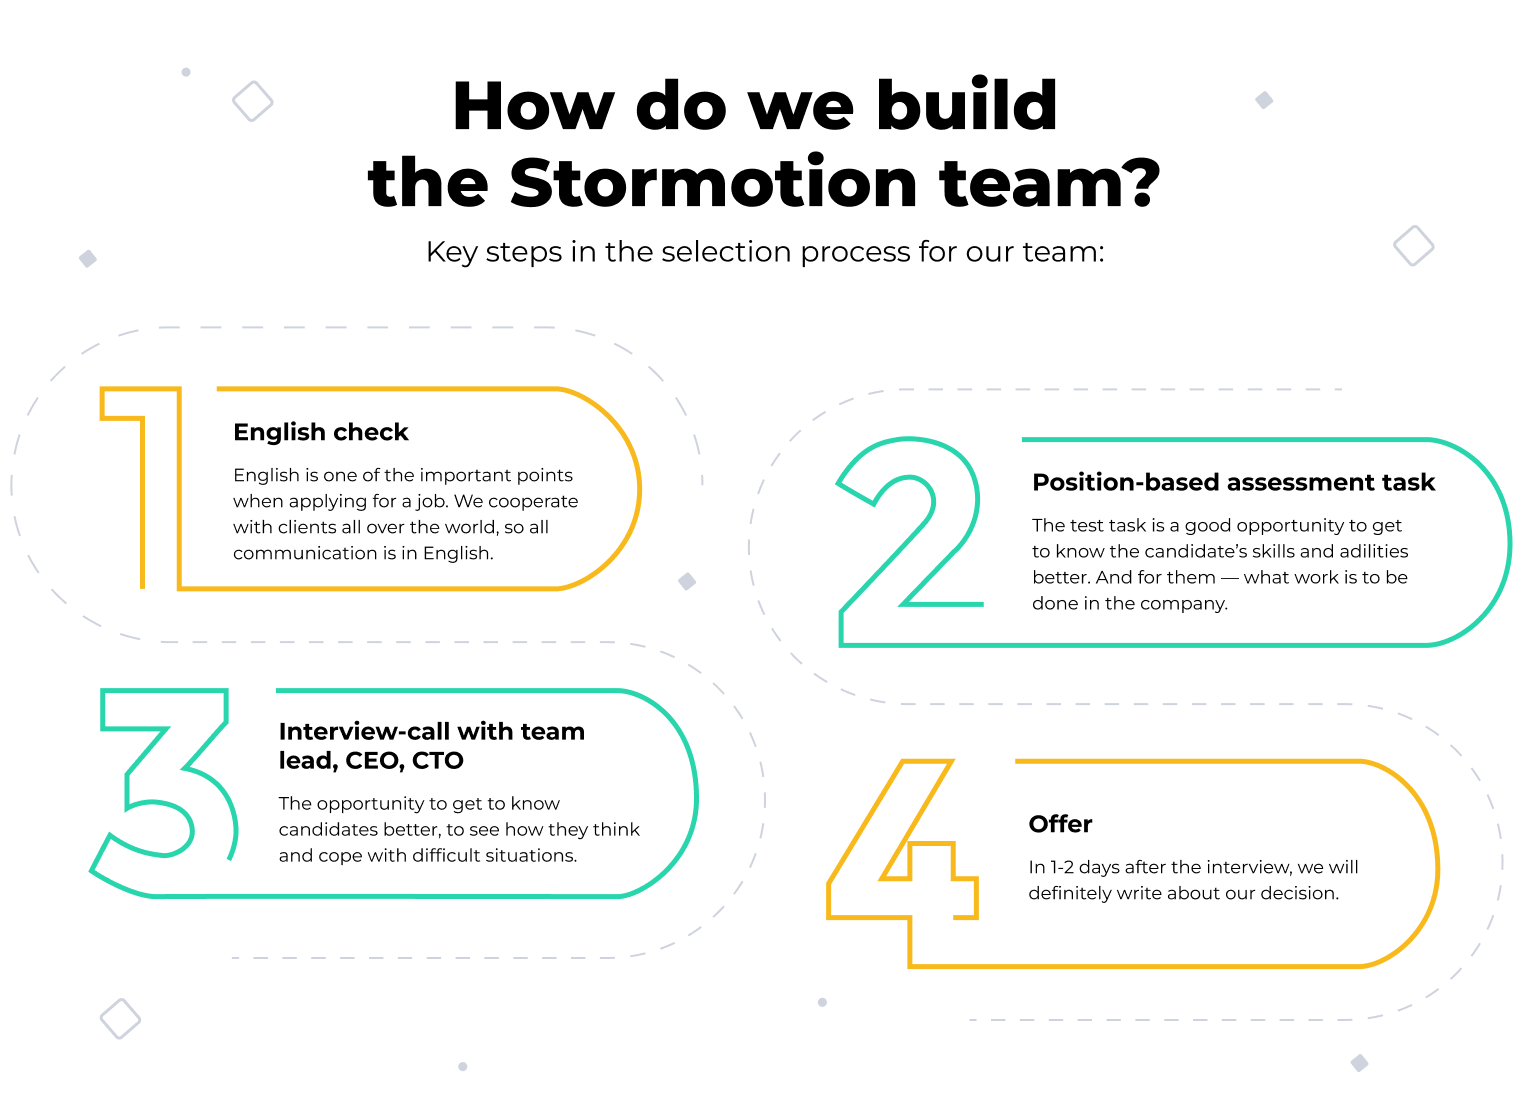 How Stormotion team is built